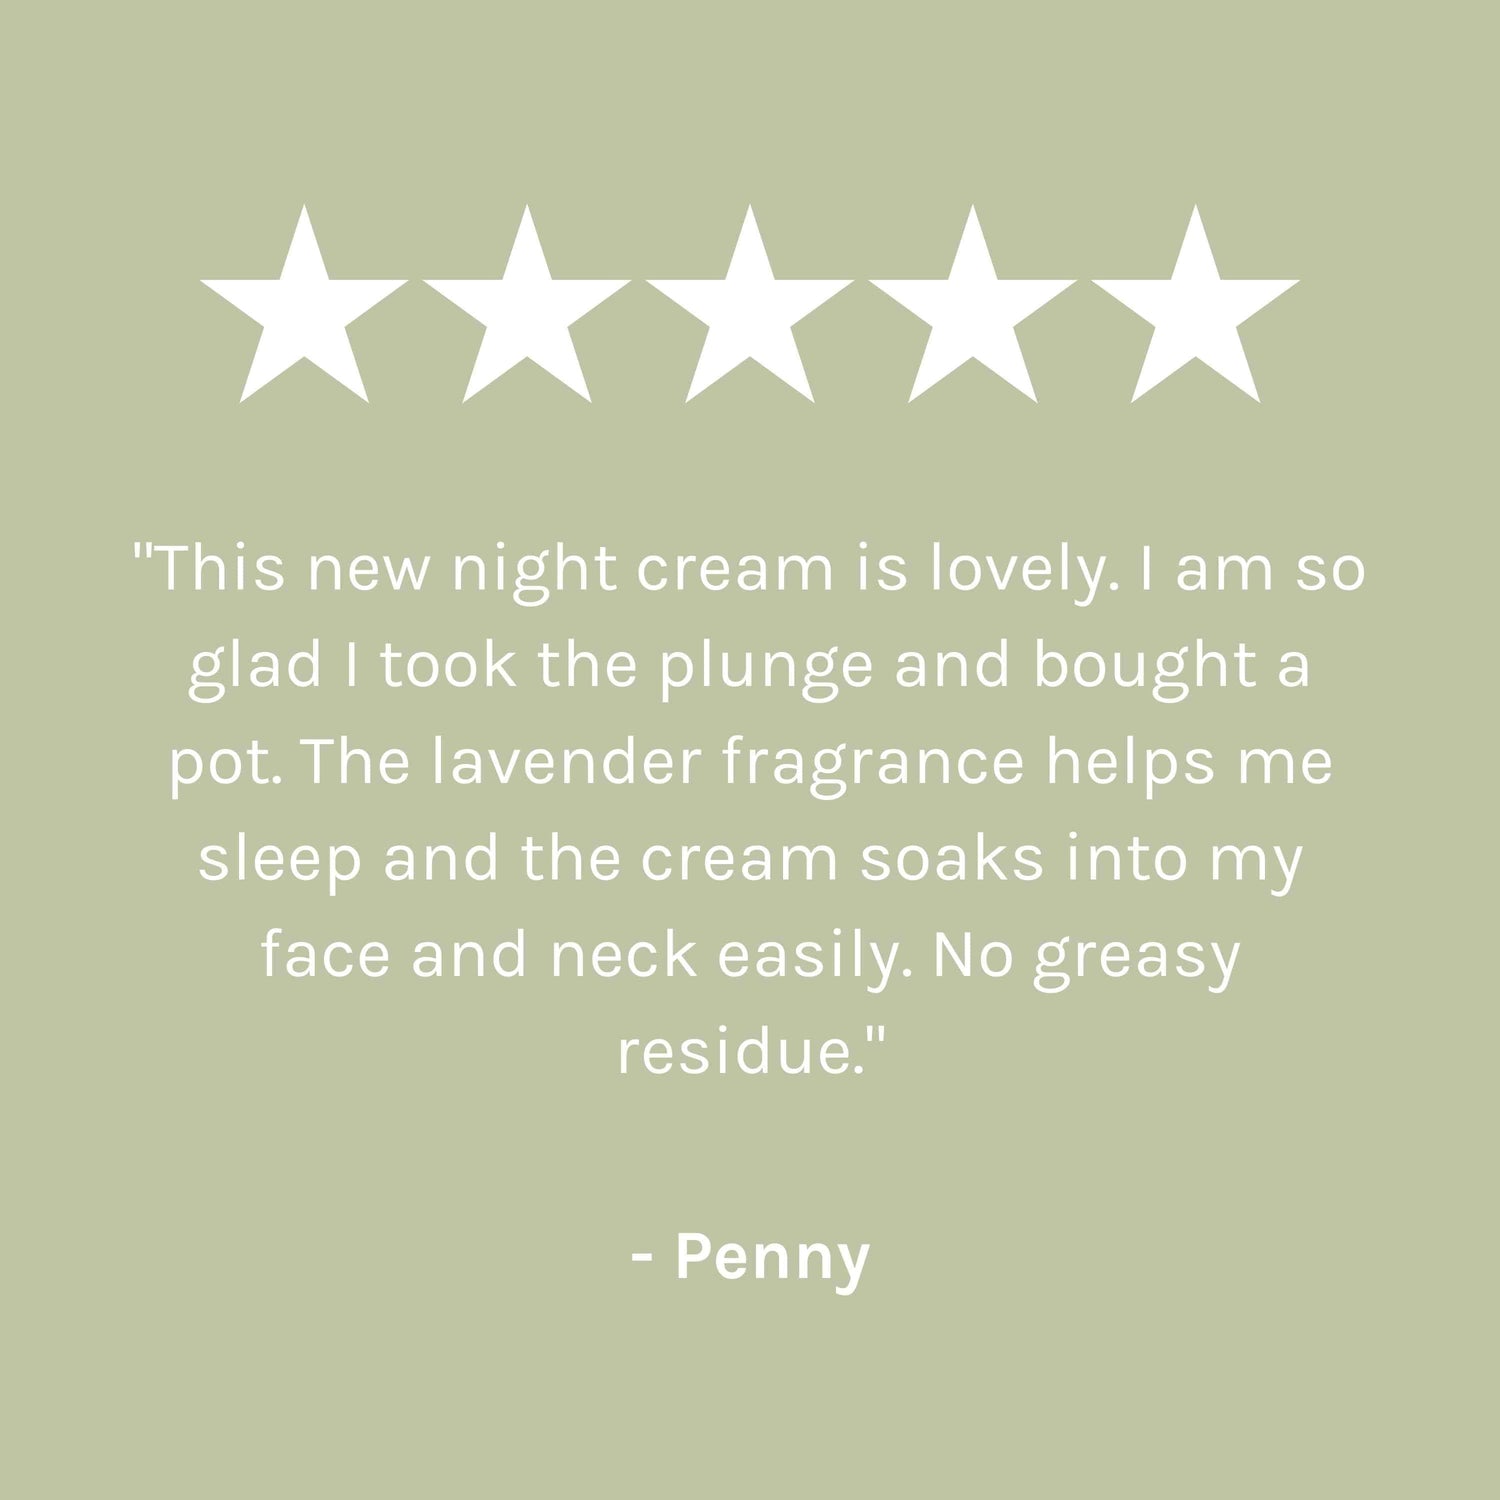 &quot;This new night cream is lovely. I am so glad I took the plunge and bought a pot. The lavender fragrance helps me sleep and the cream soaks into my face and neck easily. No gready residue.&quot; - Penny